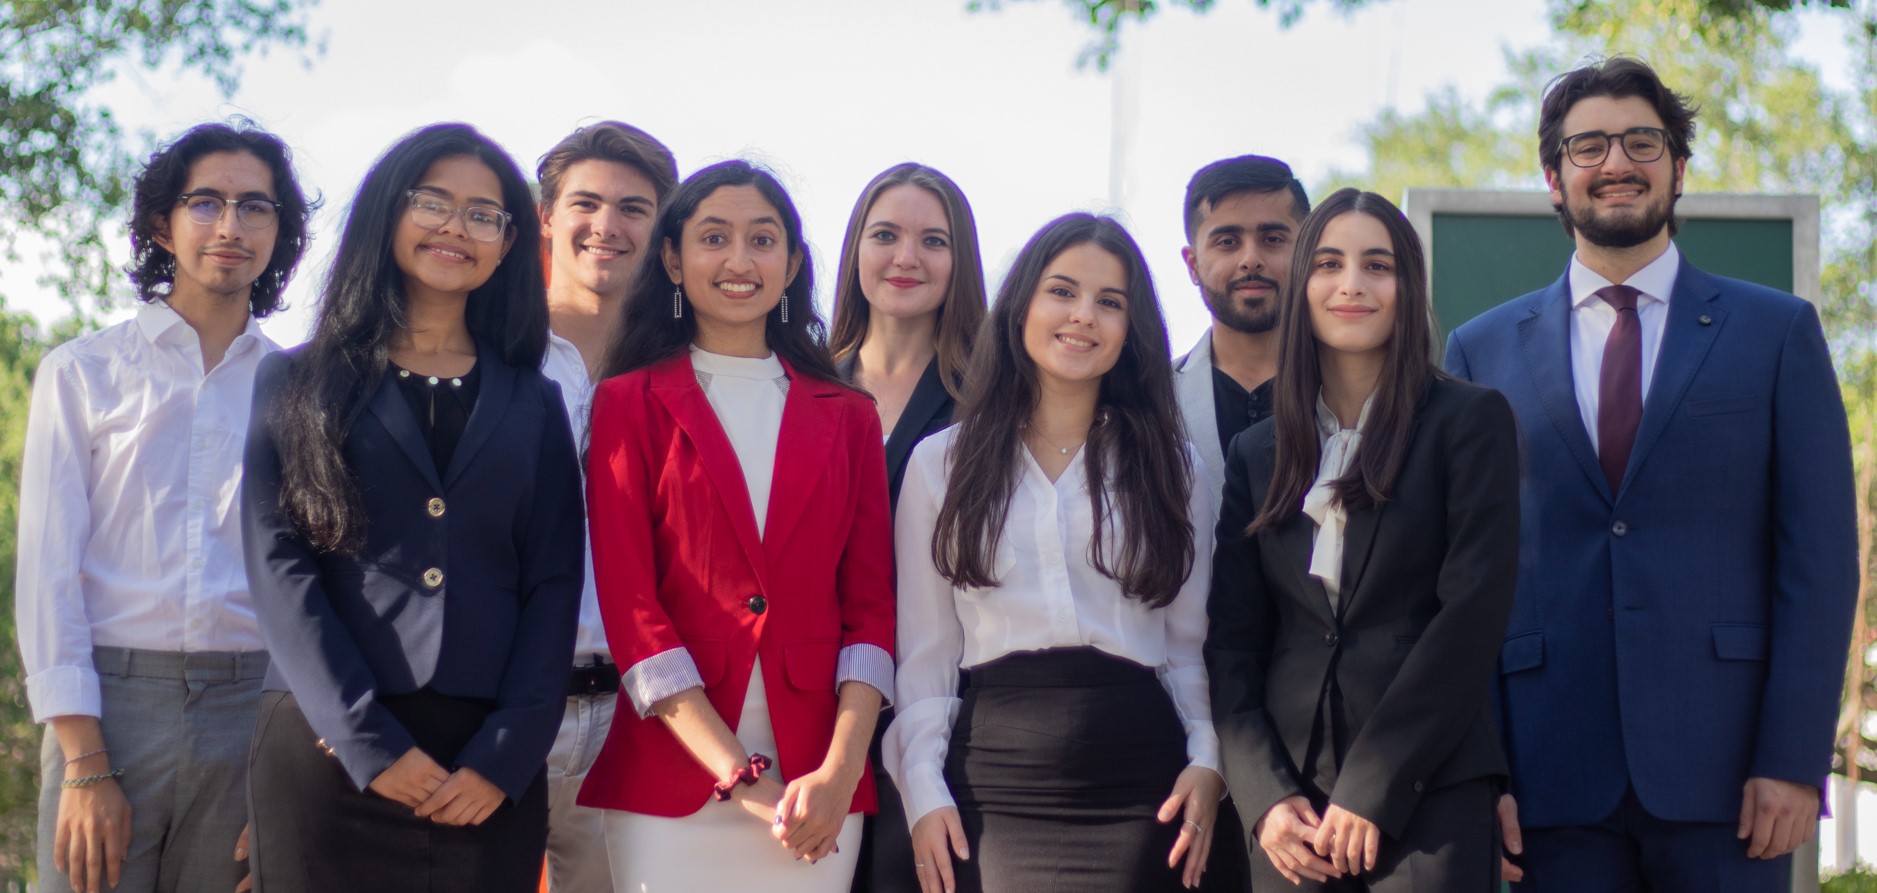 Tethys Consulting and Phoenix Group, first place winning teams at the 2022 International Business Ethics and Sustainability Case Competition (IBESCC), and Ethics Society President.